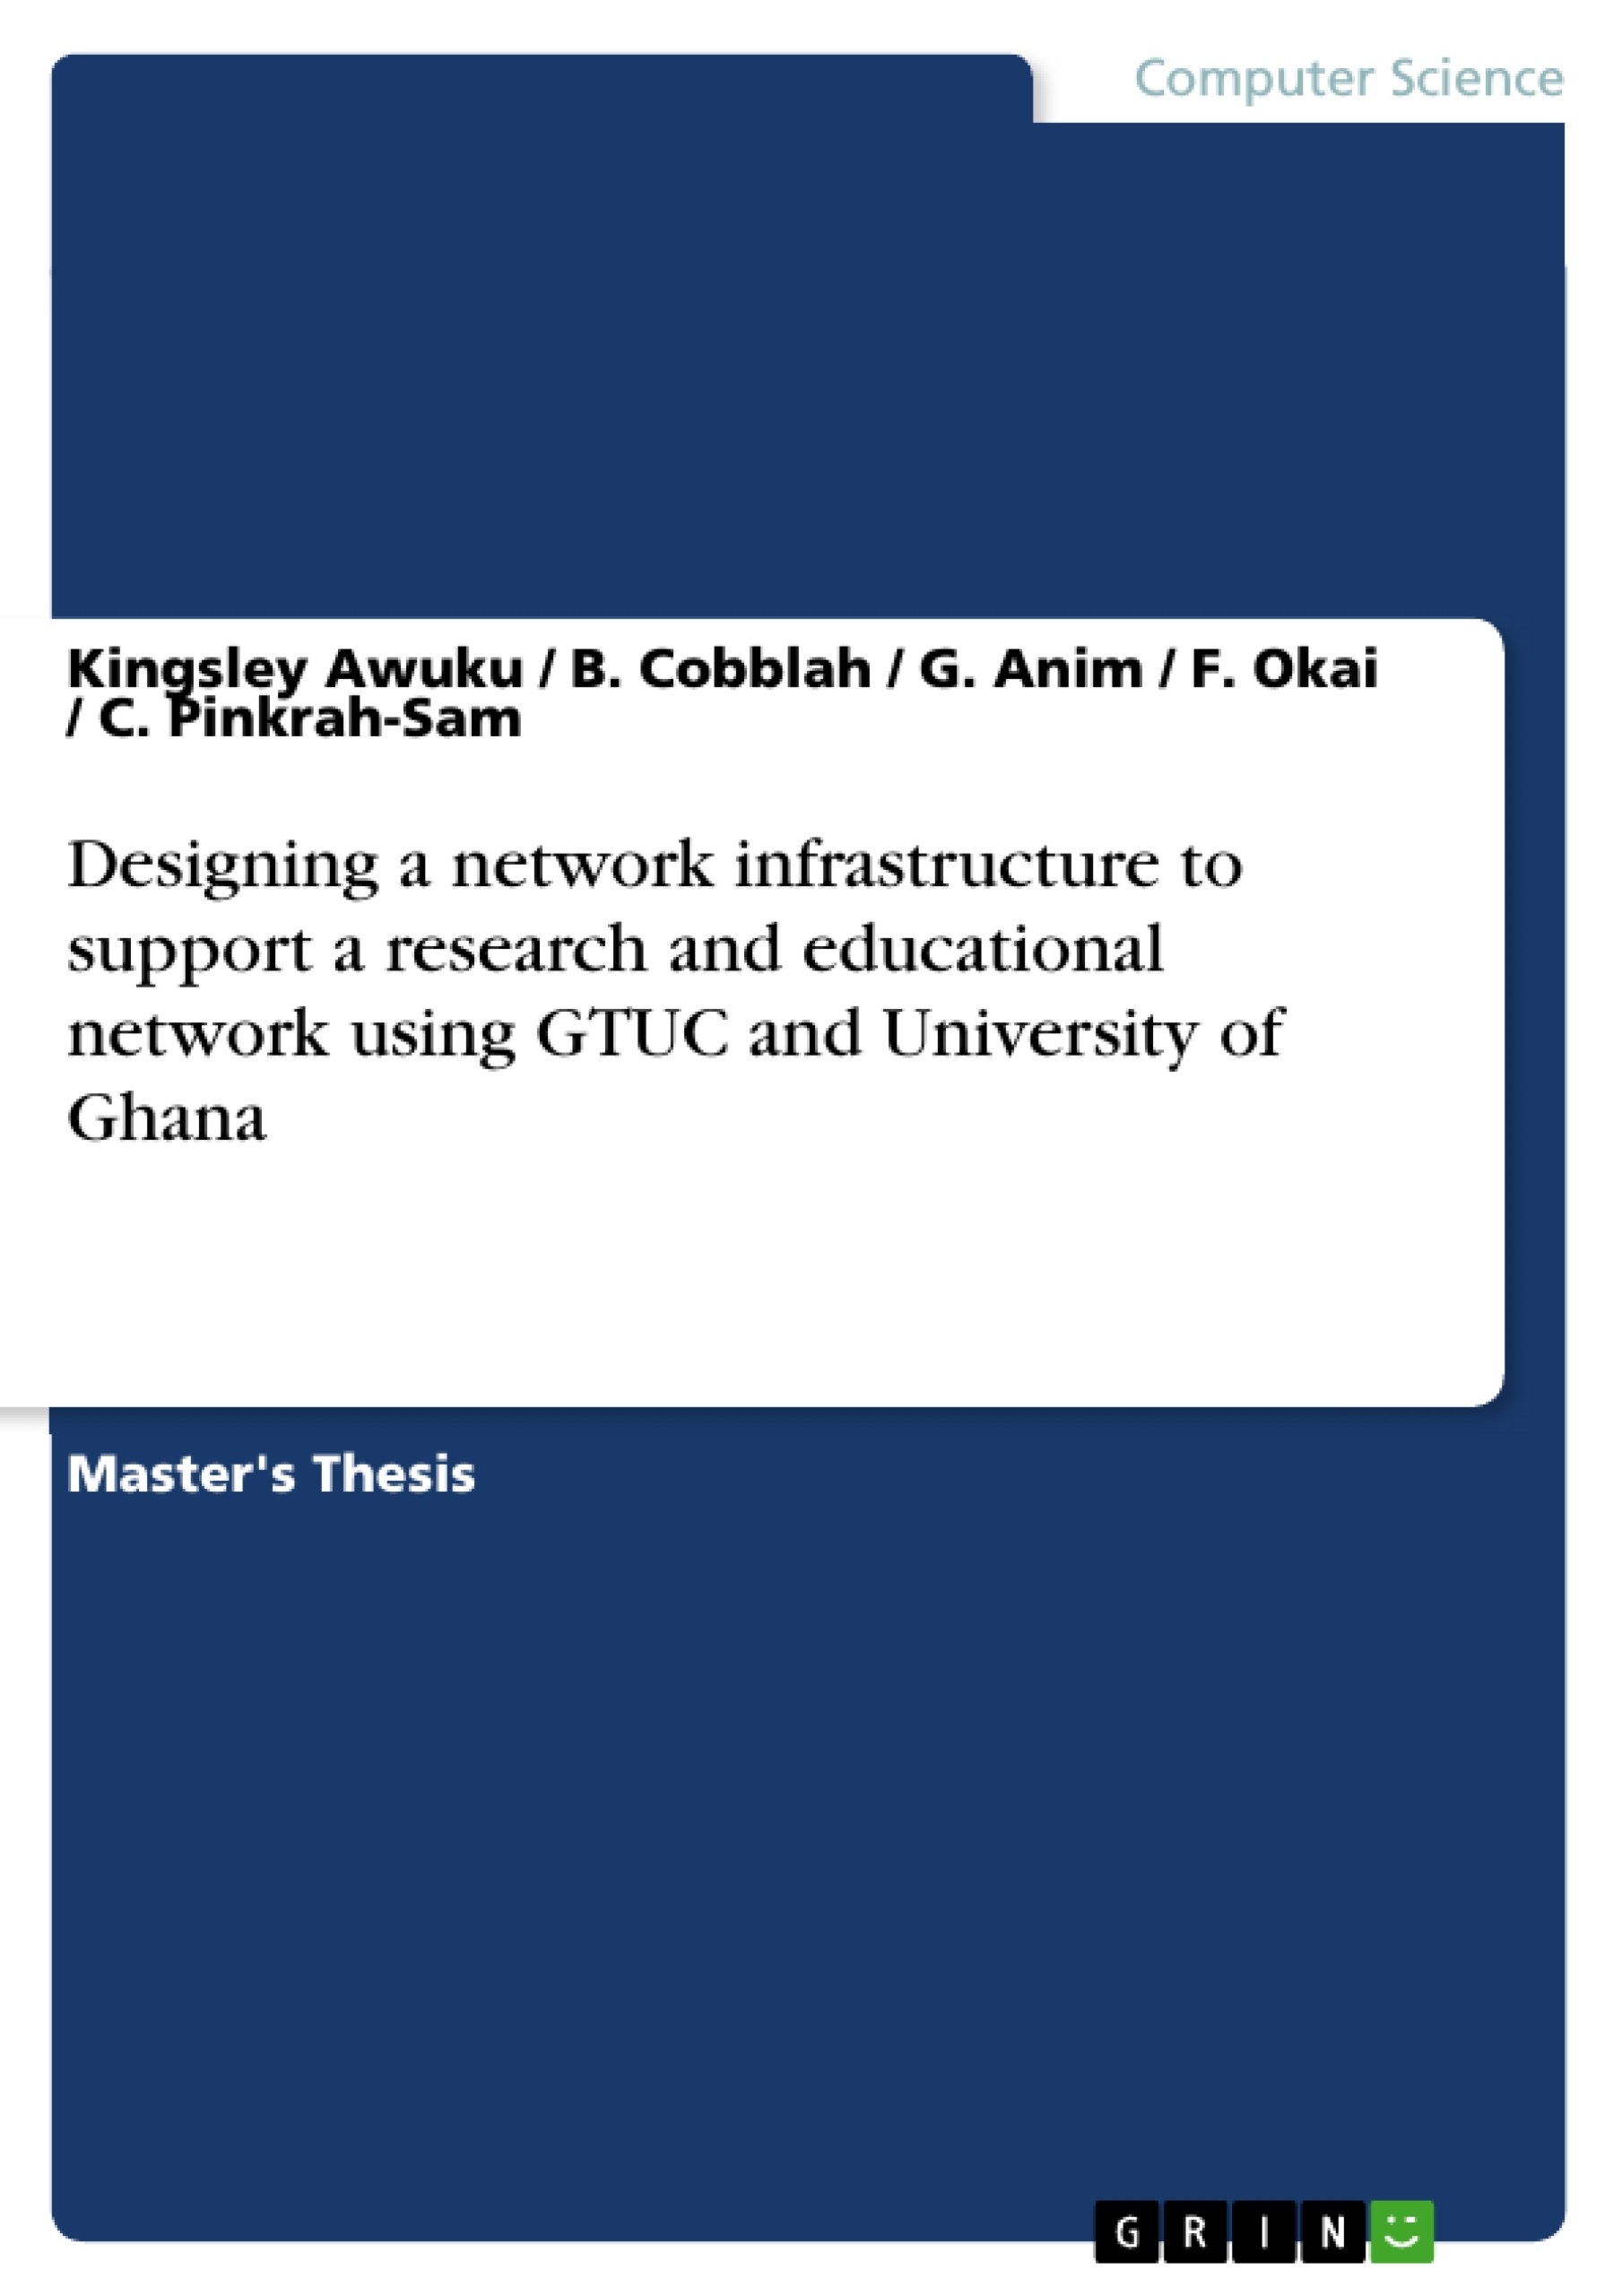 Título: Designing a network infrastructure to support a research and educational network using GTUC and University of Ghana